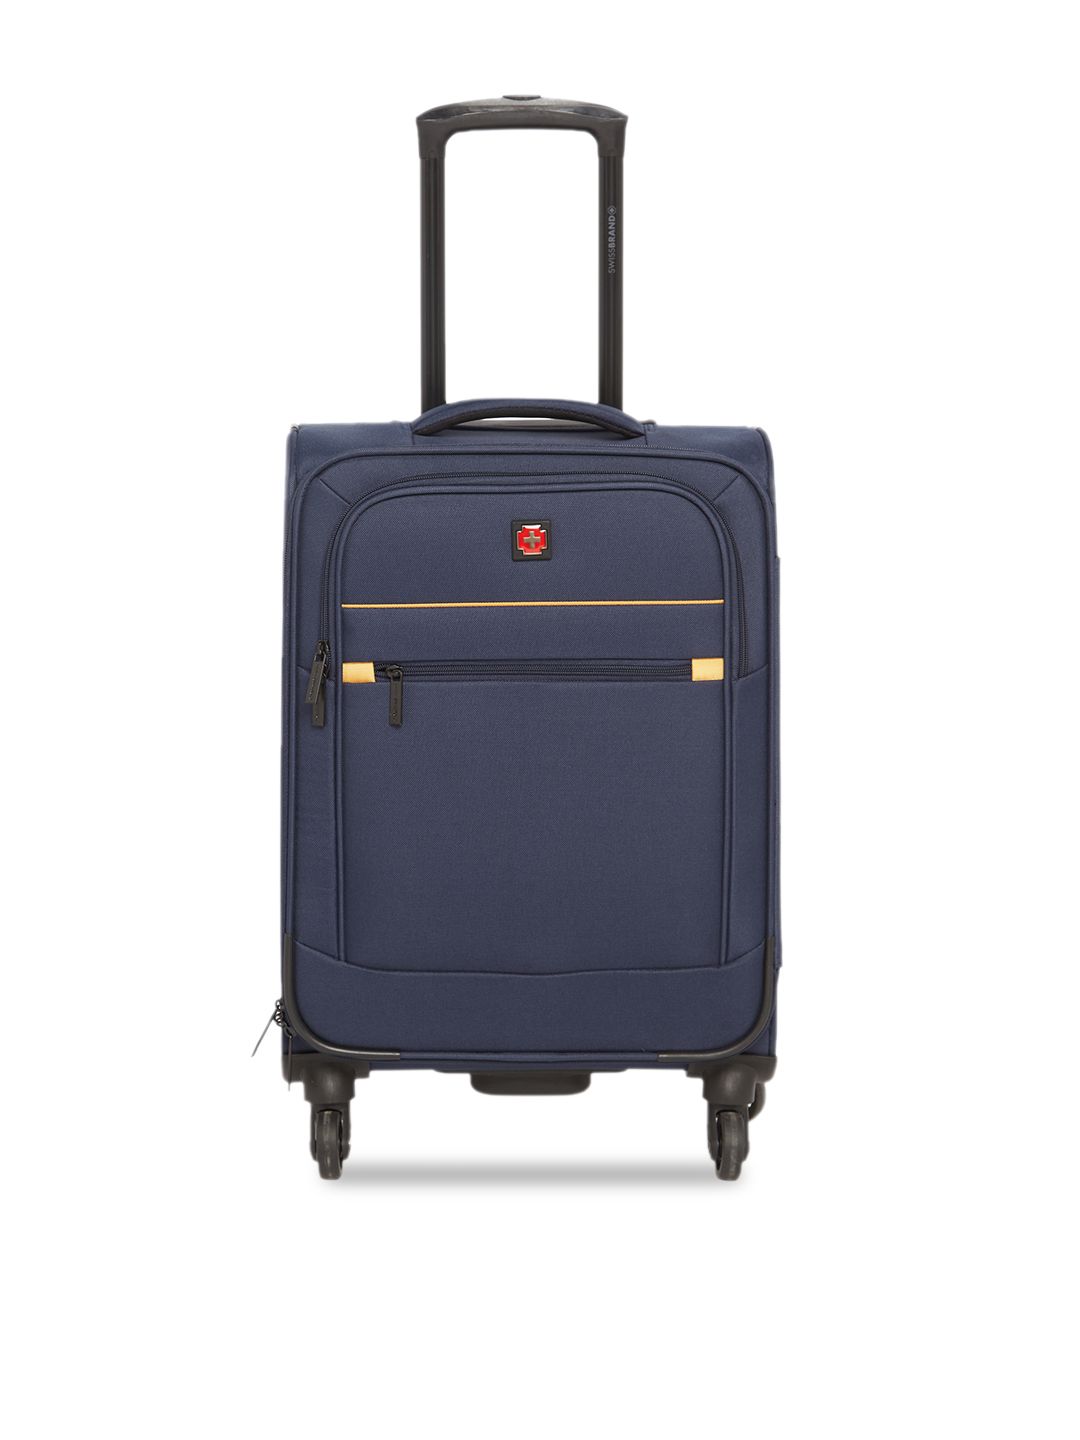 SWISS BRAND Navy Blue Solid Barcelona 360-Degree Rotation Soft-Sided Cabin Trolley Suitcase Price in India